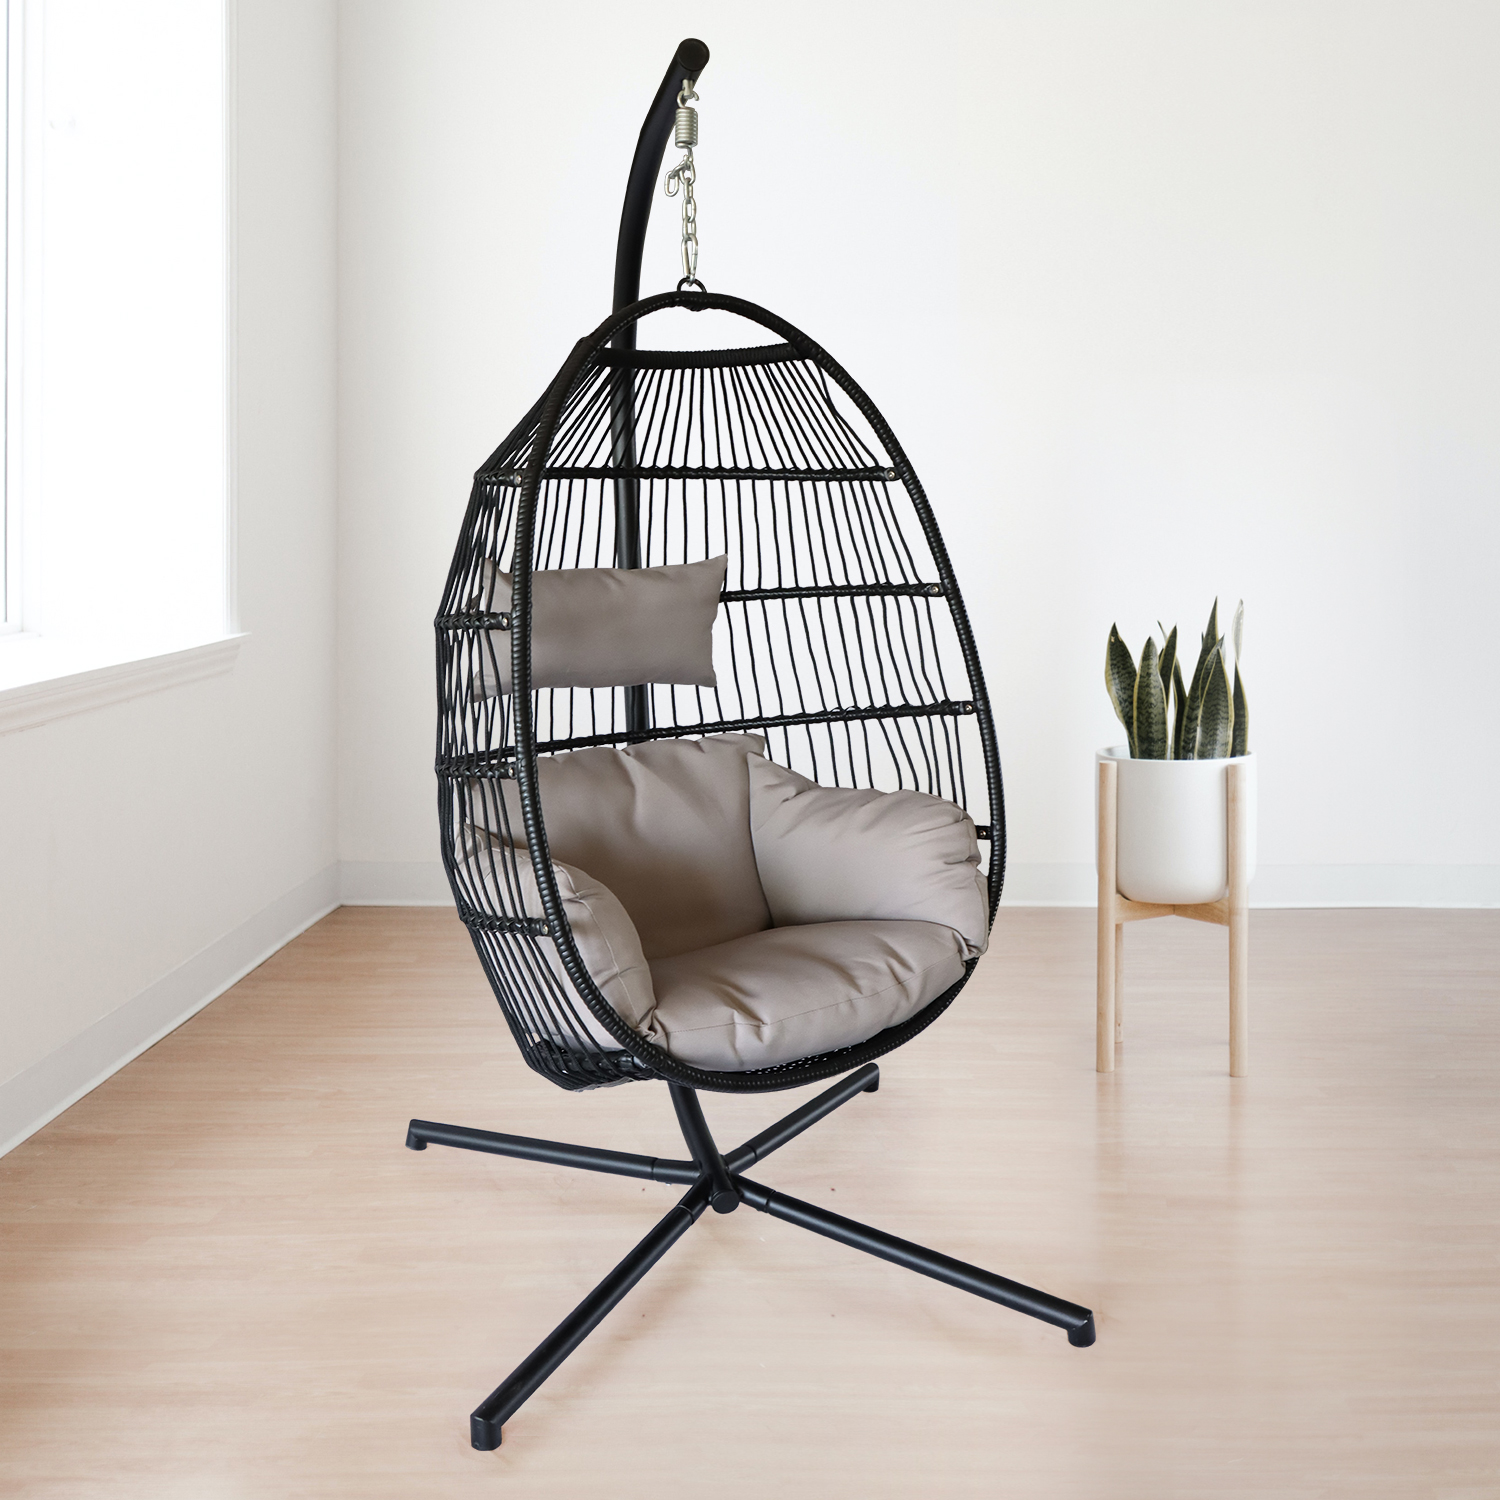 Hanging Egg Chair with Stand Outdoor Patio Swing Egg Chair Indoor Folding Egg Chair, Waterproof Cushion, Folding Rope Back, Heavy Duty C-Stand, 330LBS Capacity-Boyel Living